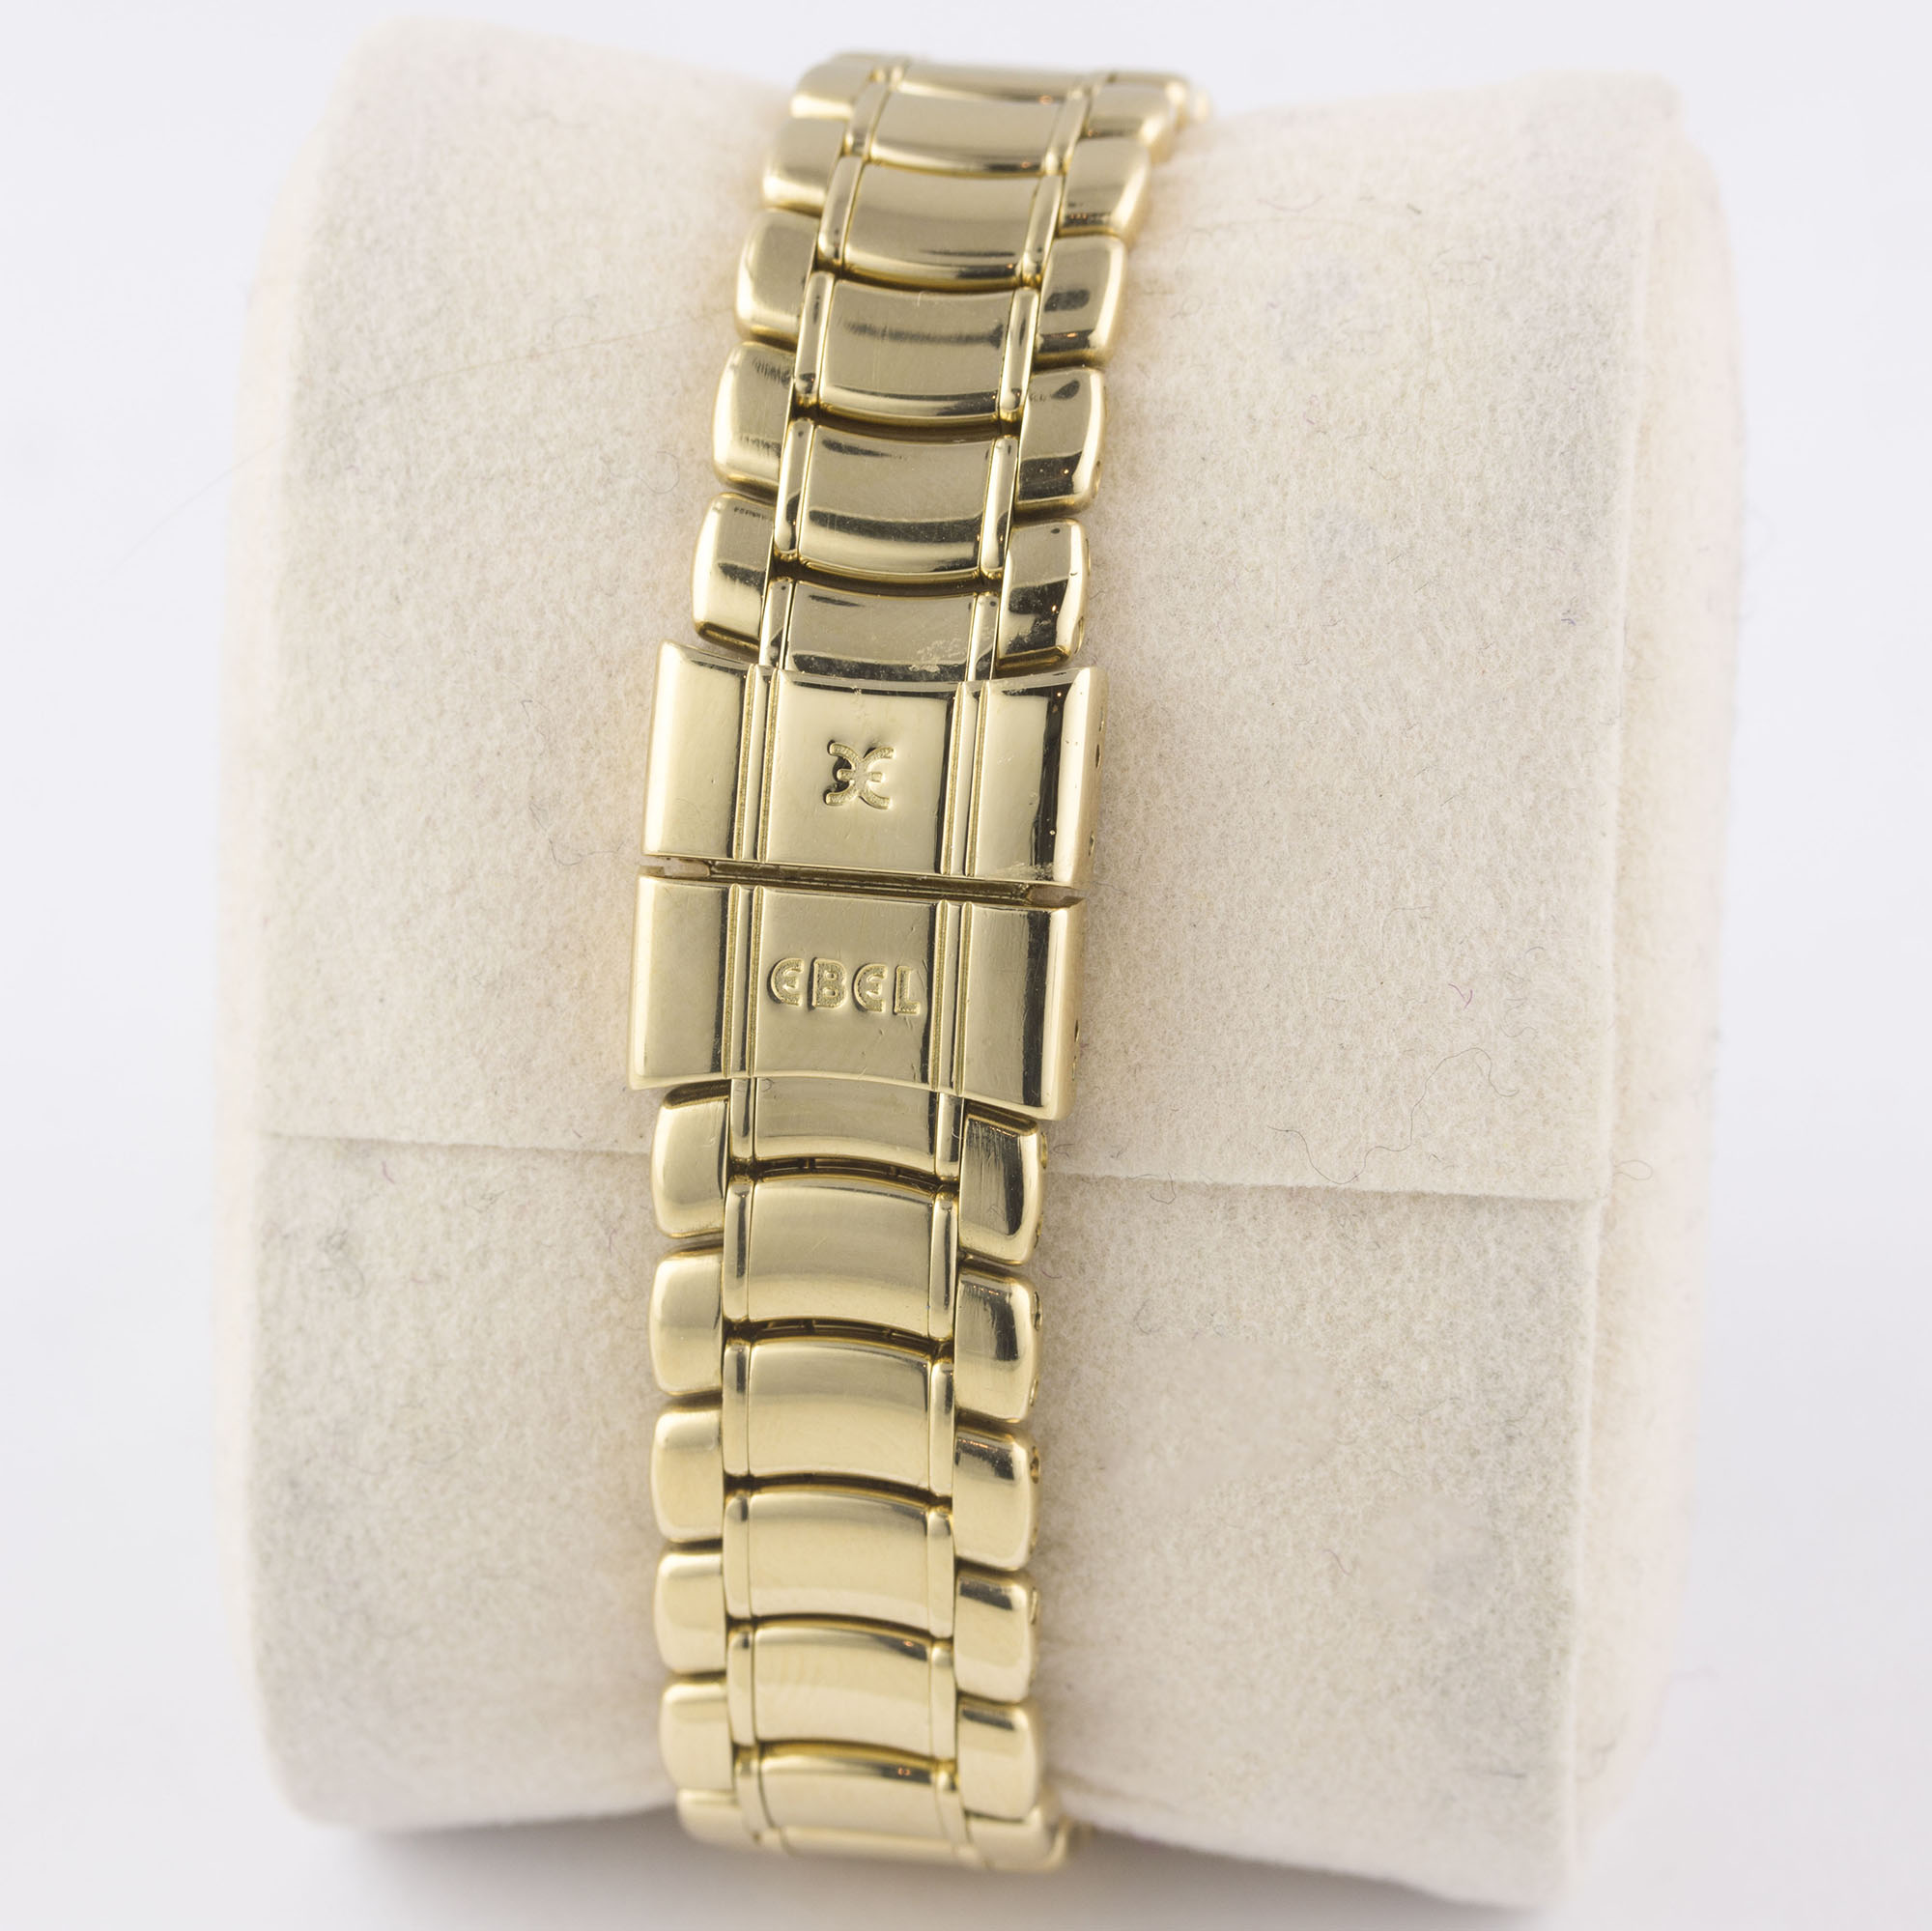 A LADIES 18K SOLID GOLD & DIAMOND EBEL 1911 BRACELET WATCH CIRCA 2000s, REF. E8090224 WITH - Image 5 of 8